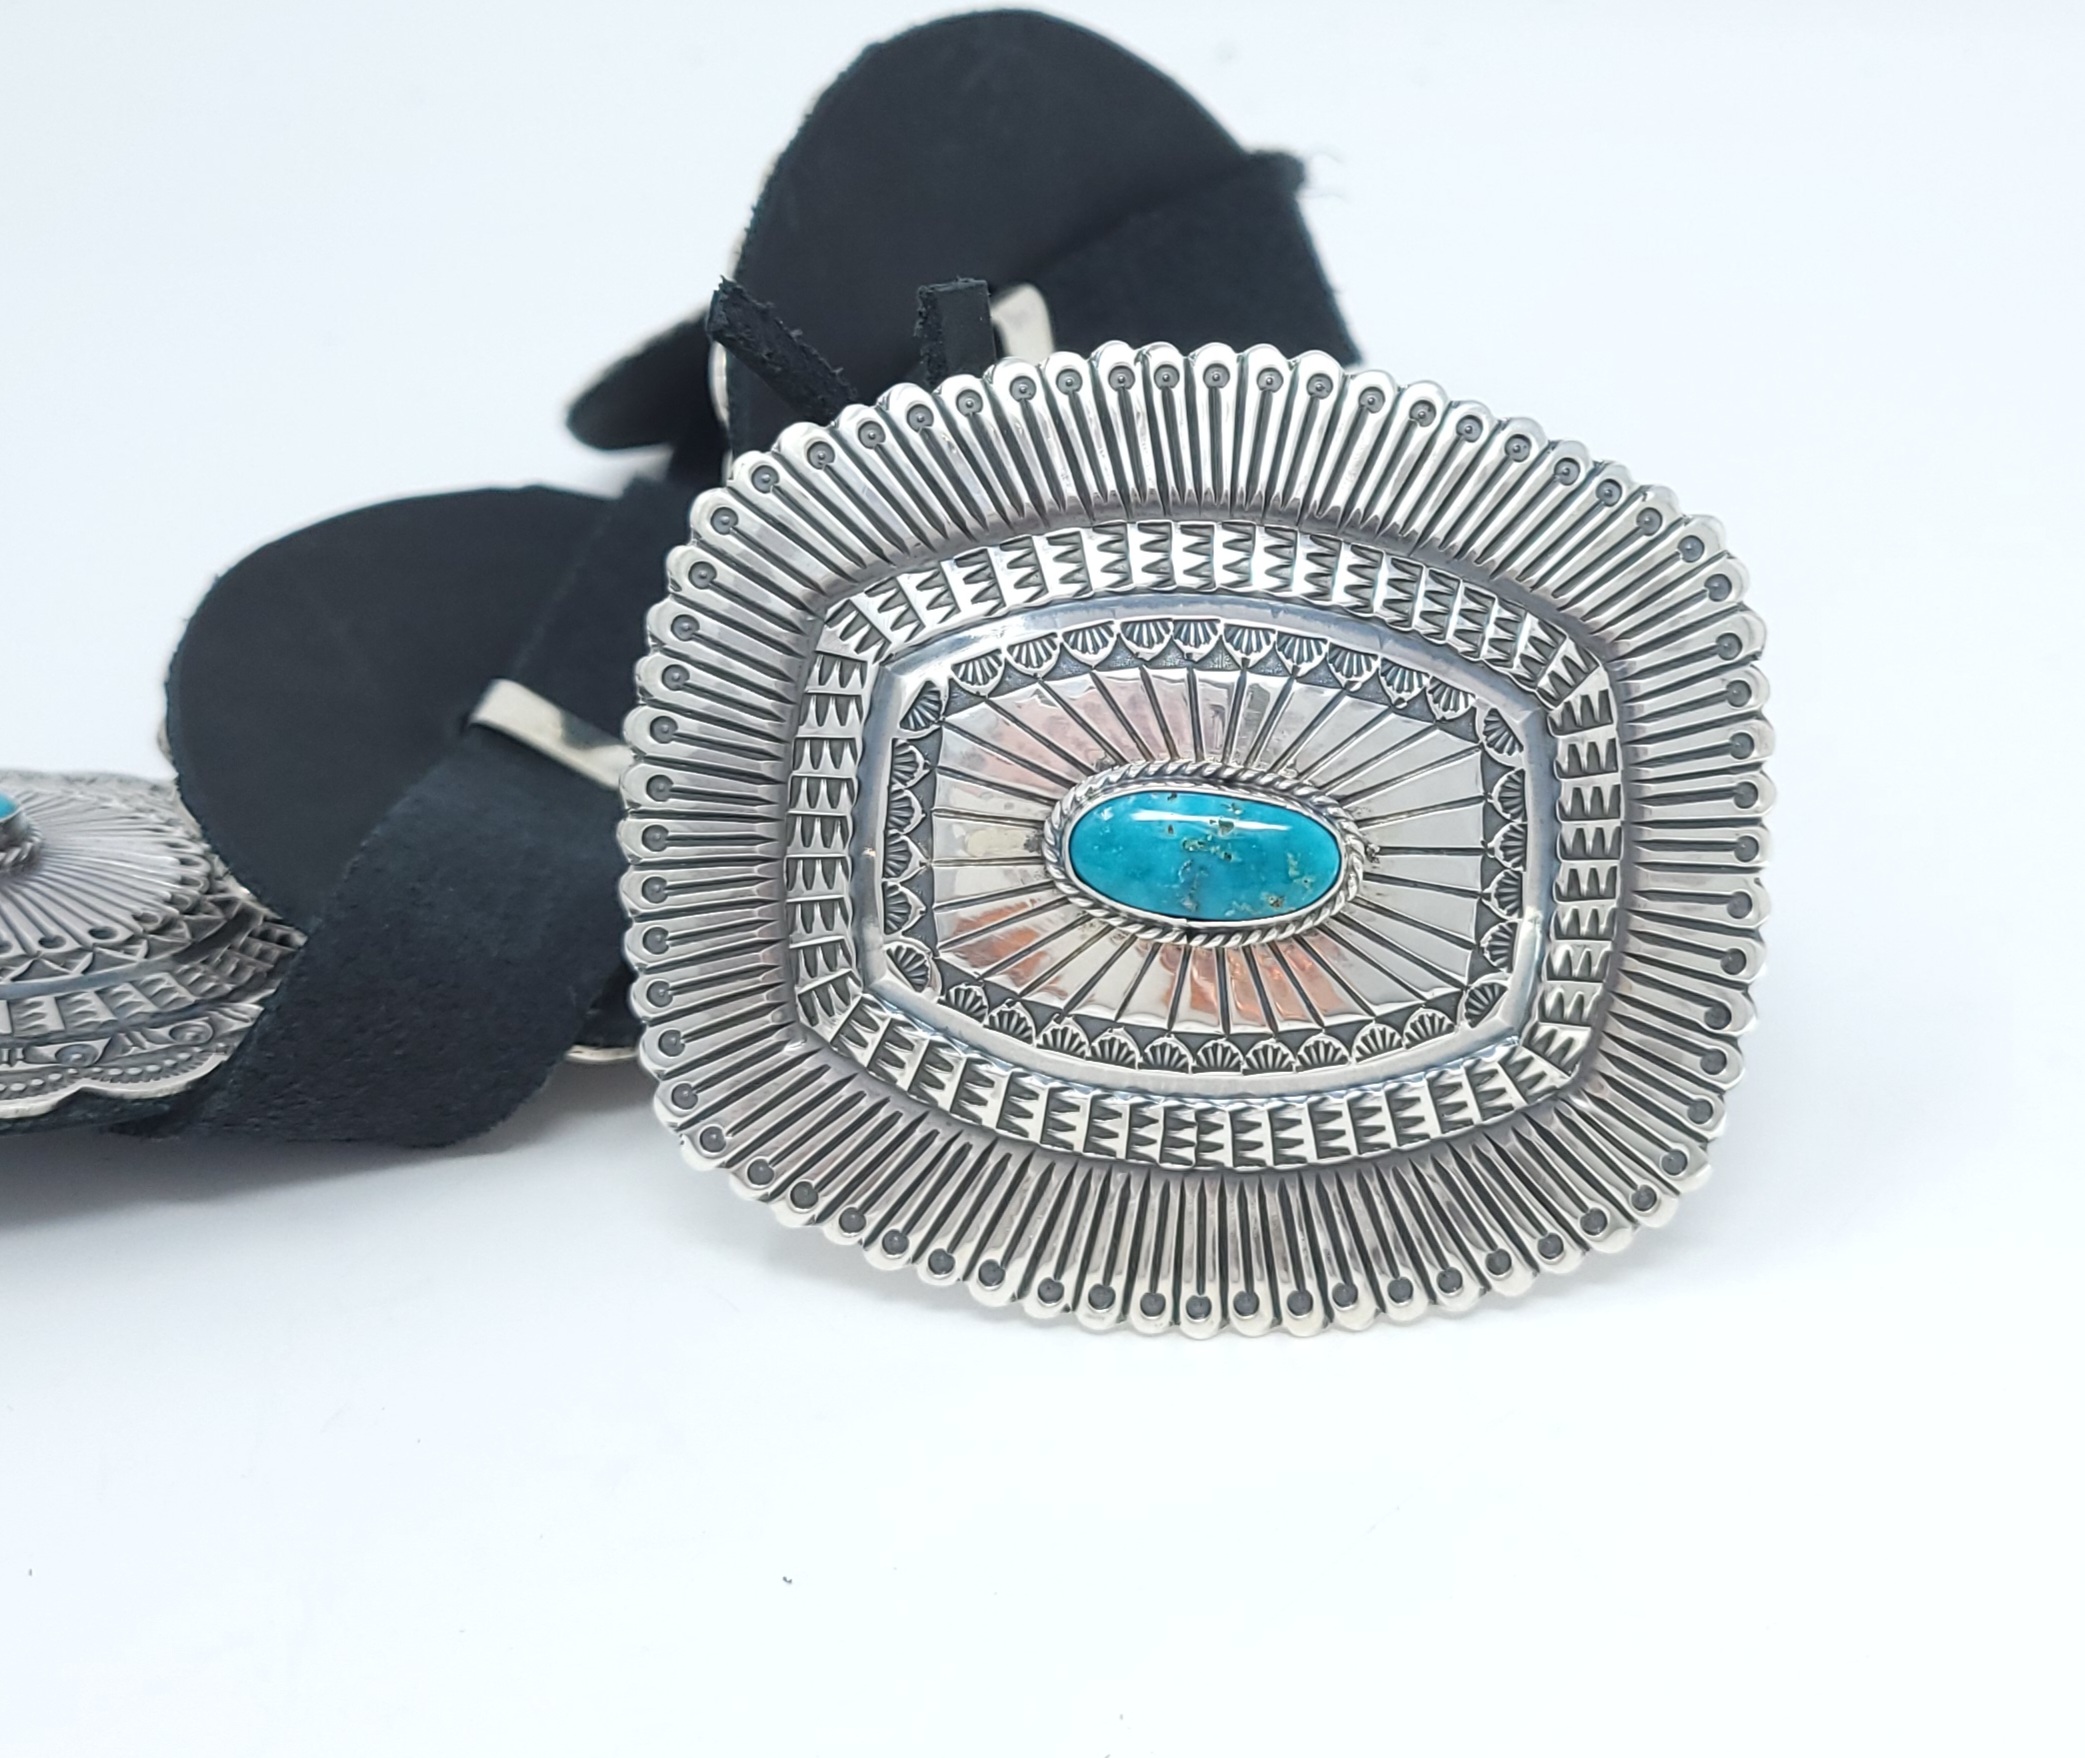 Authentic Navajo Vintage Concho belt by David Reeves